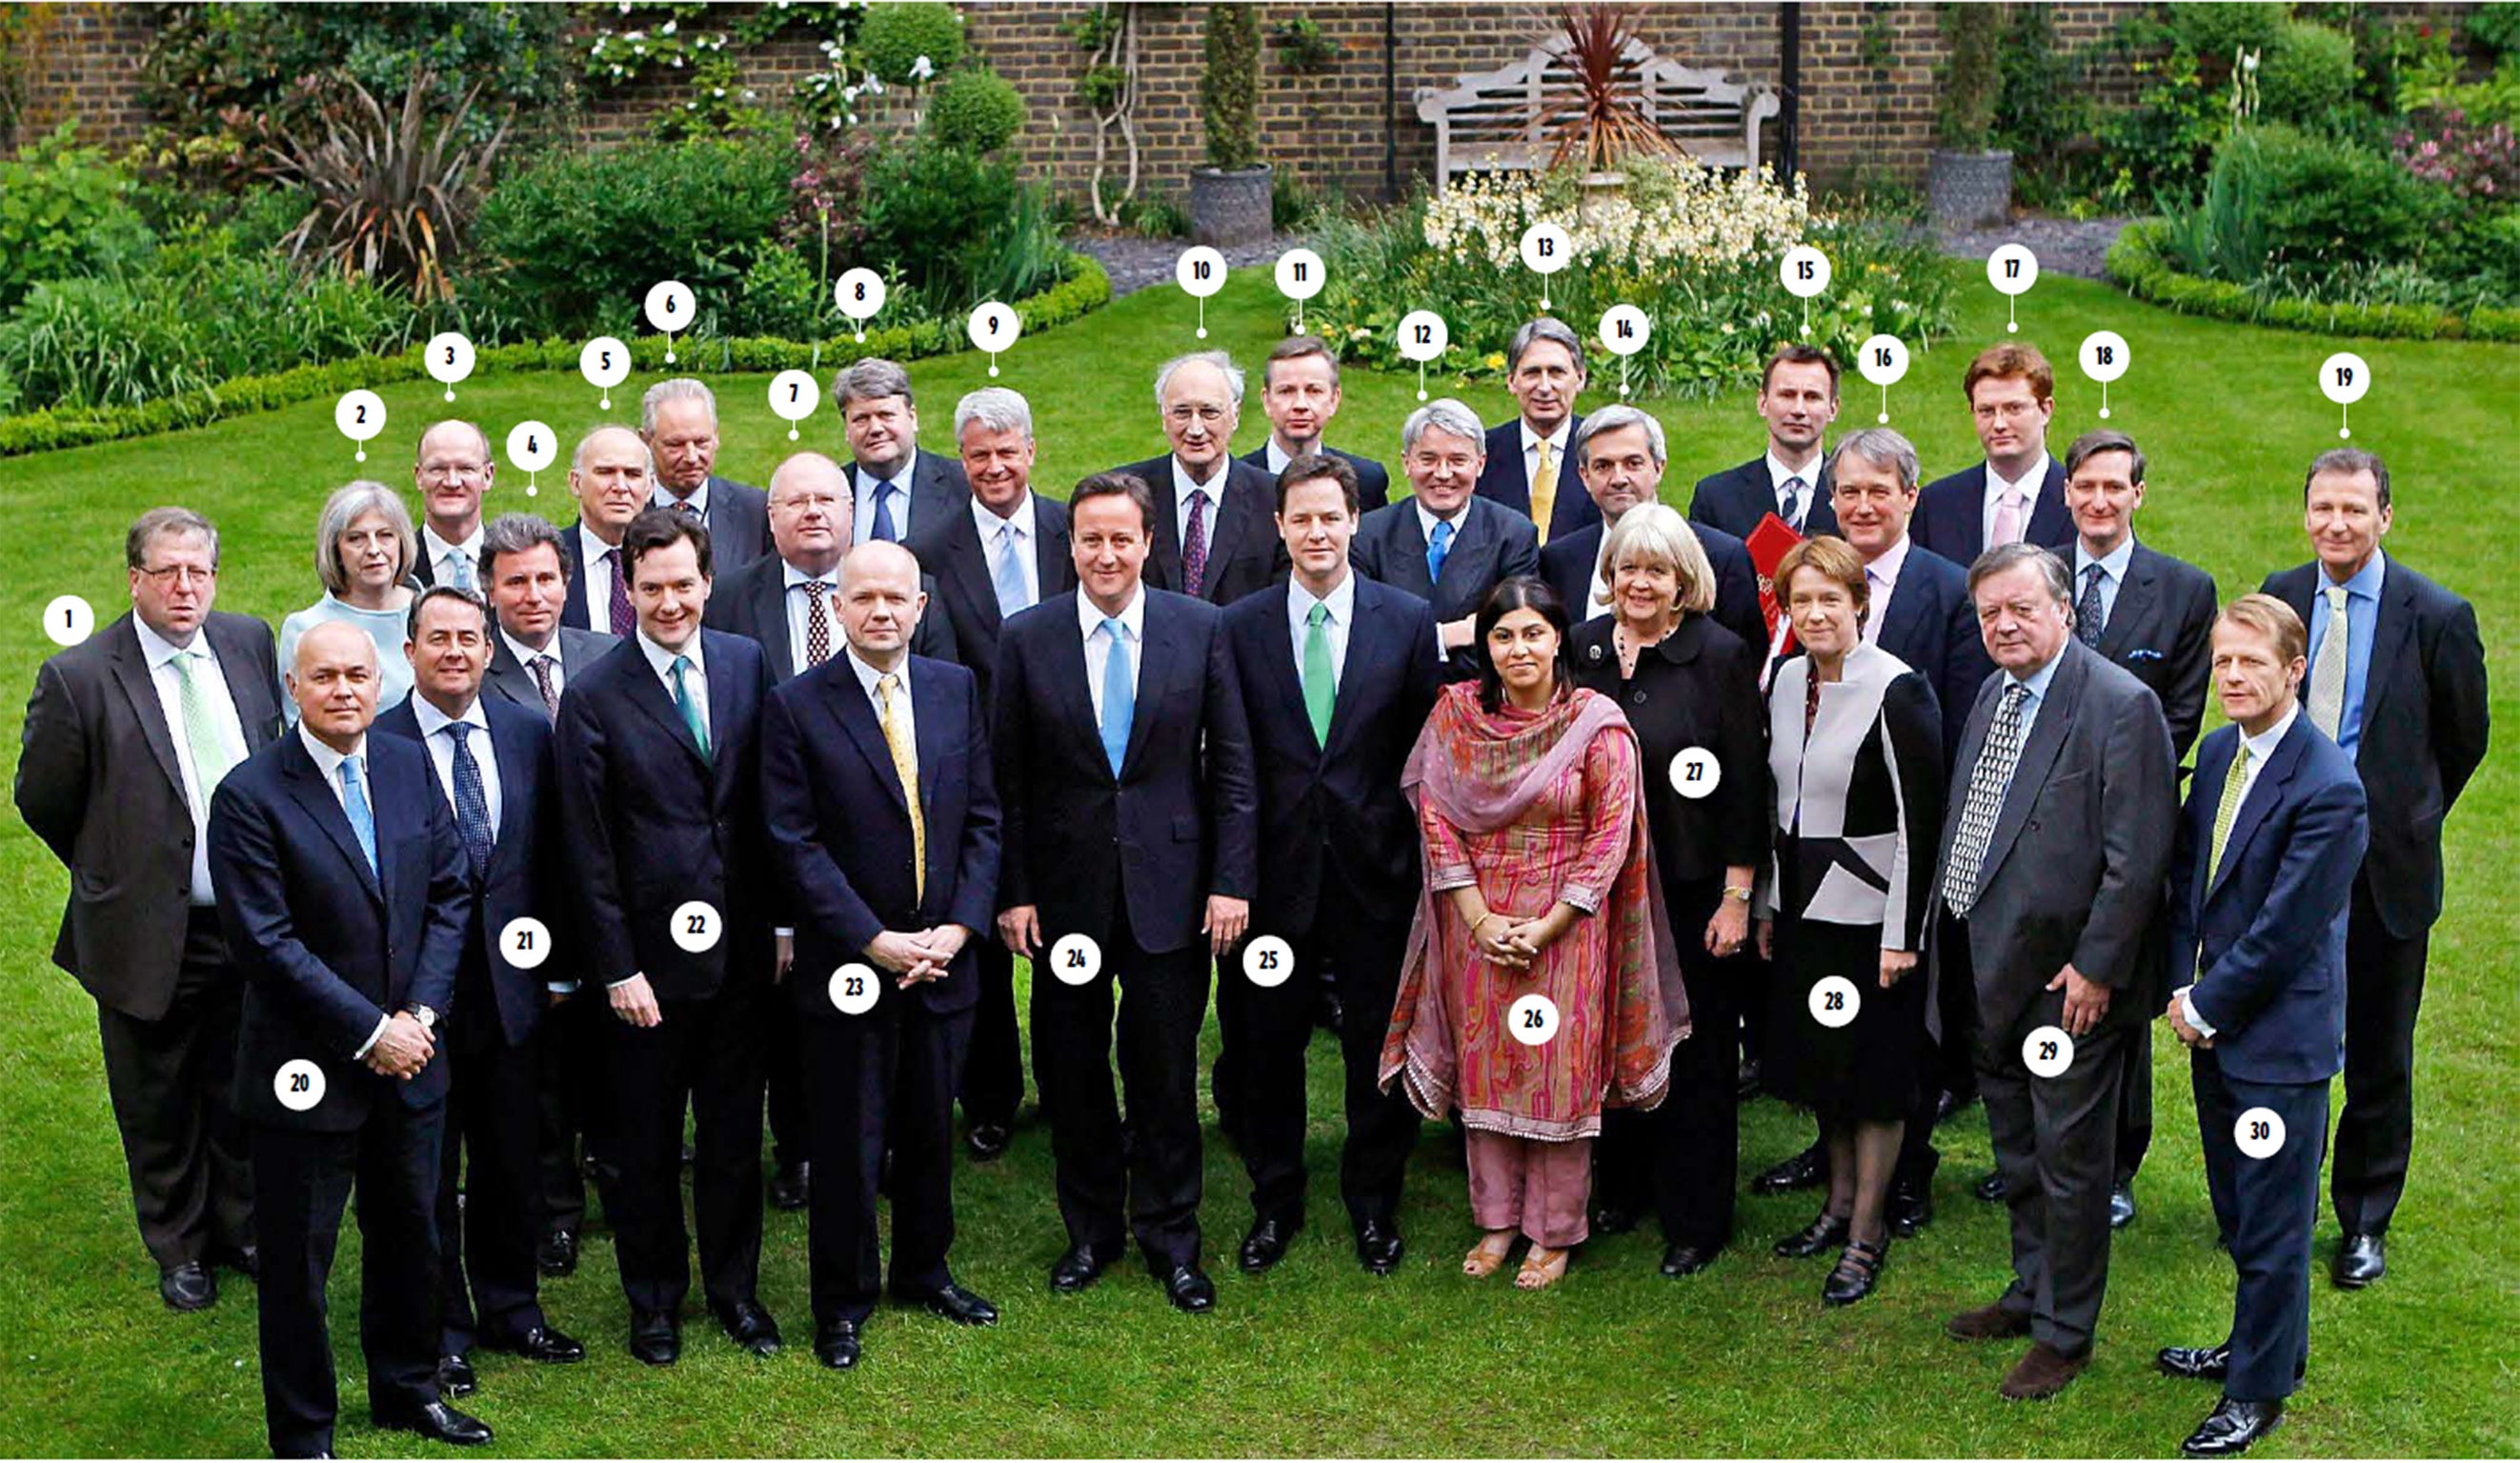 The first Coalition Cabinet posing in the garden of No 10 in May 2010. Some remain in place, some have moved jobs and some have disappeared as another election looms